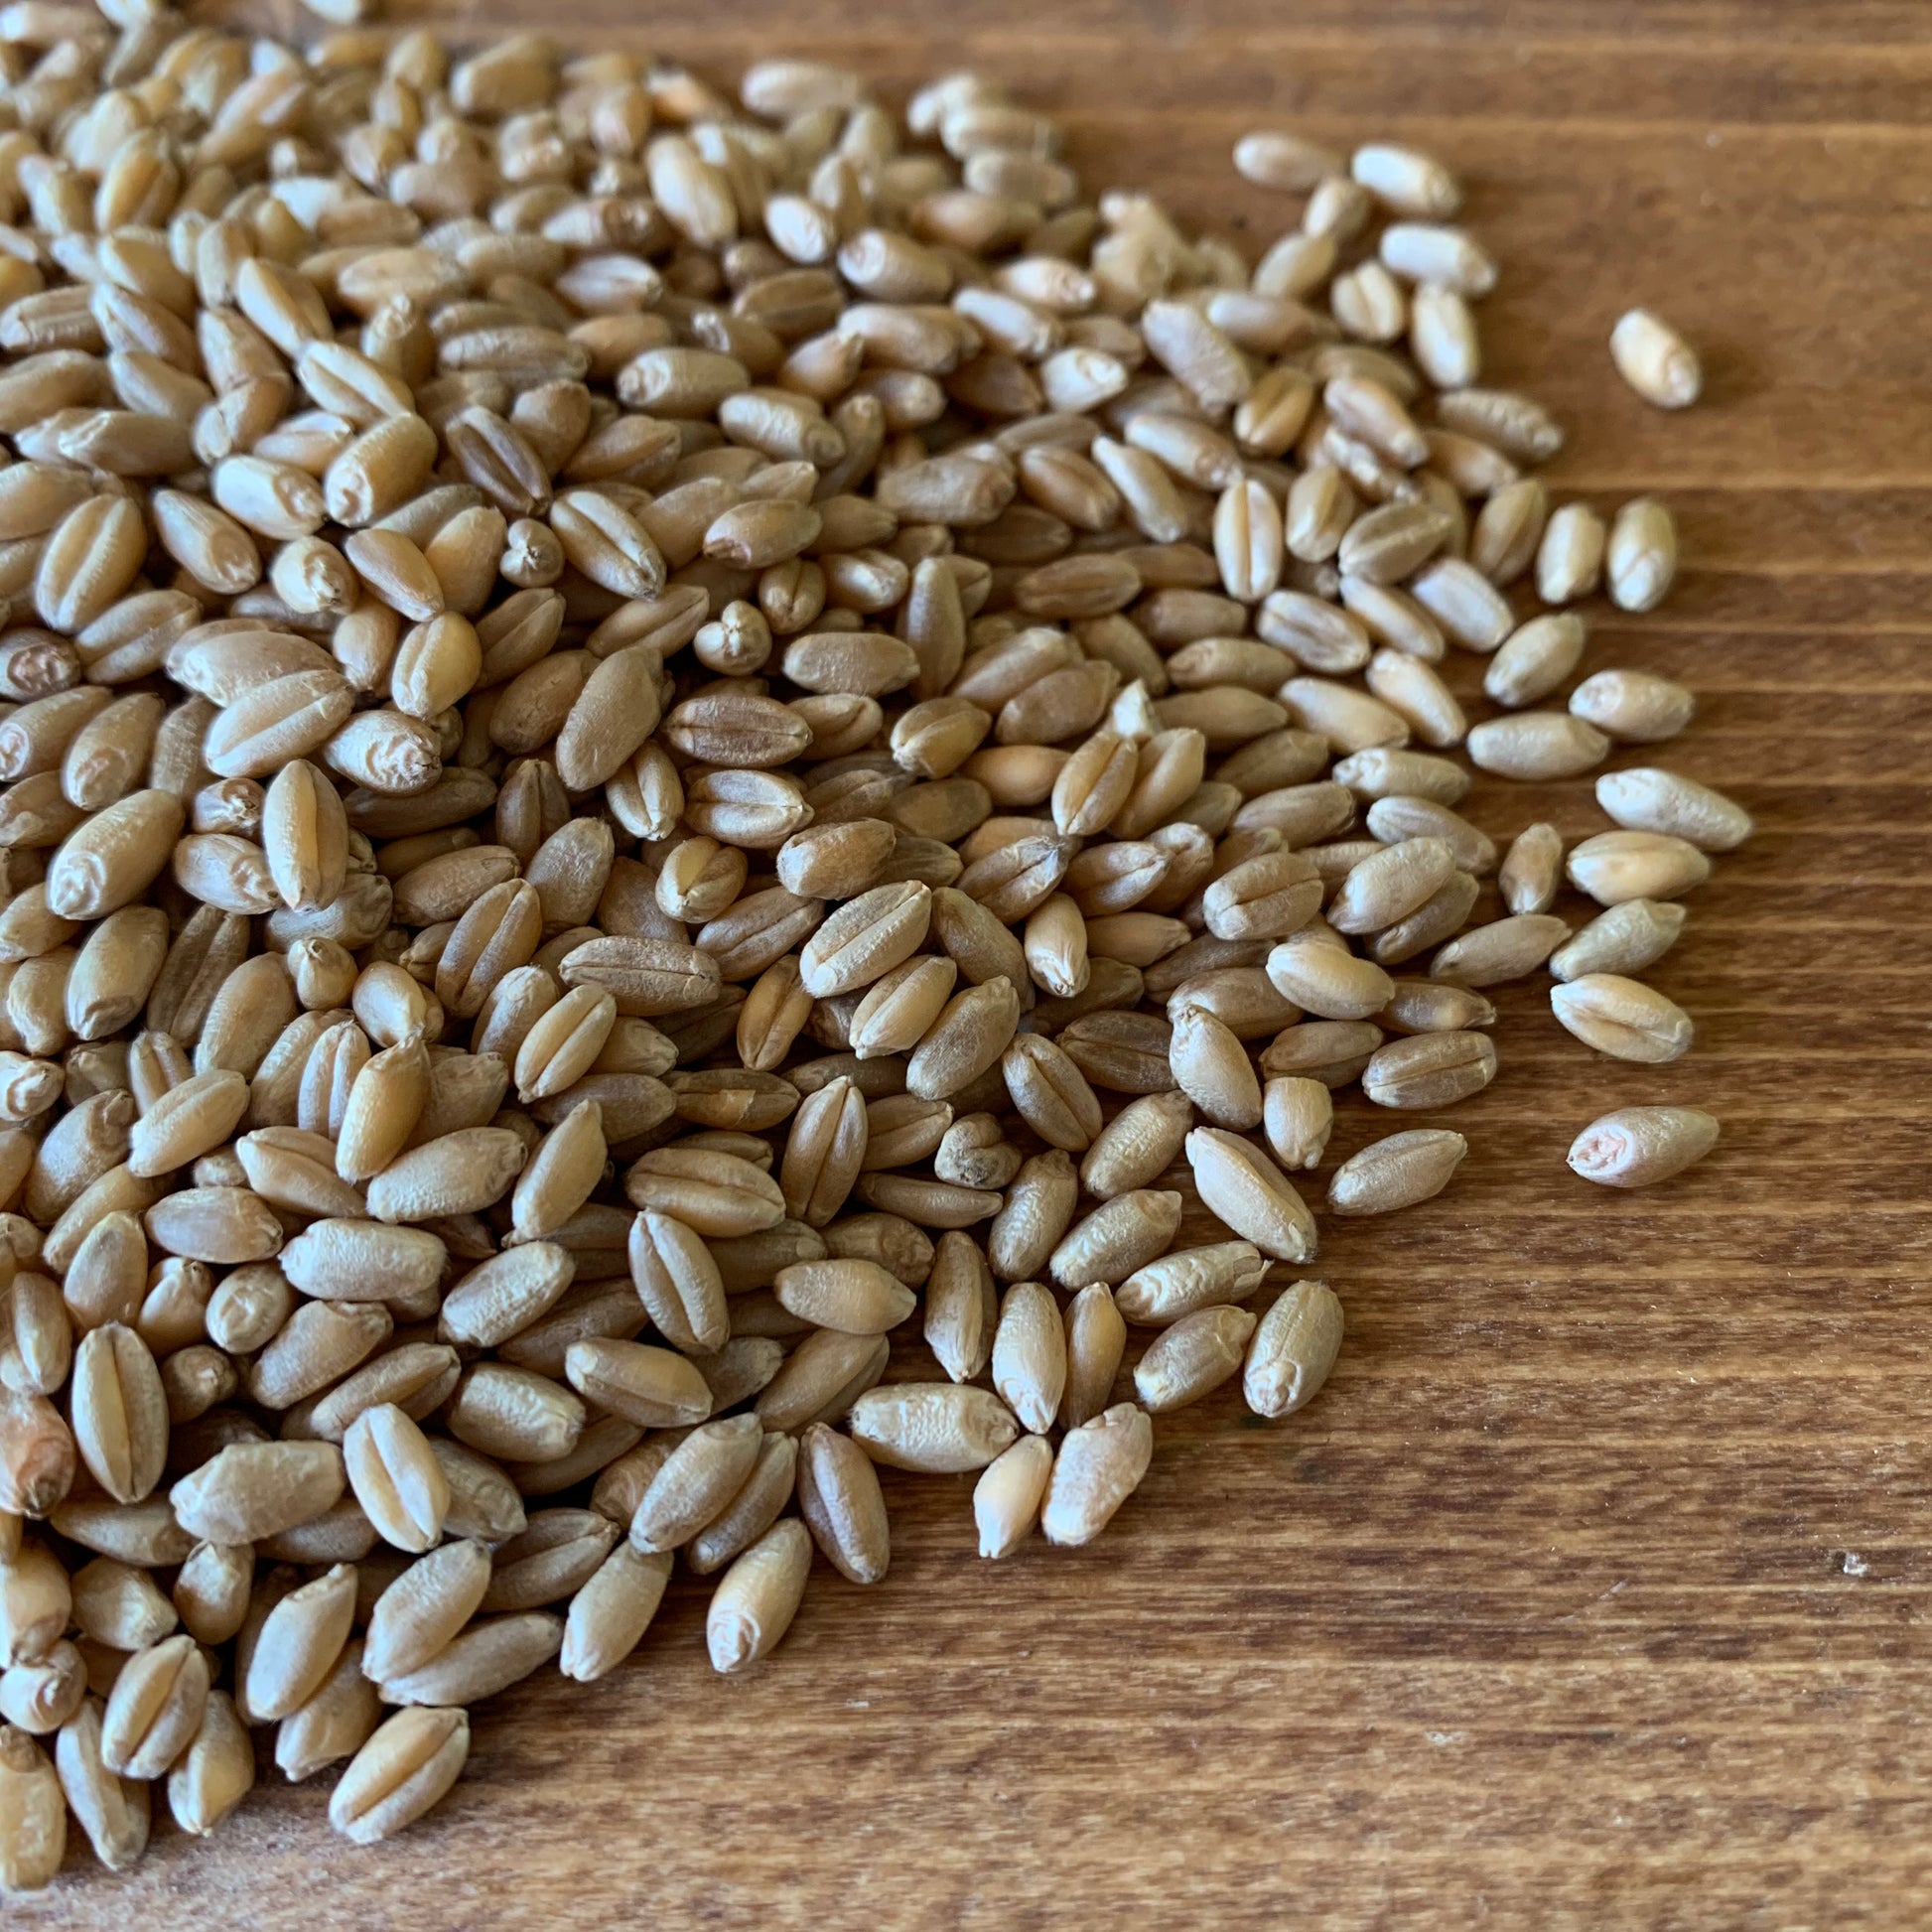 Living Sky Farm's Hard Red Wheat Berries on a brown table